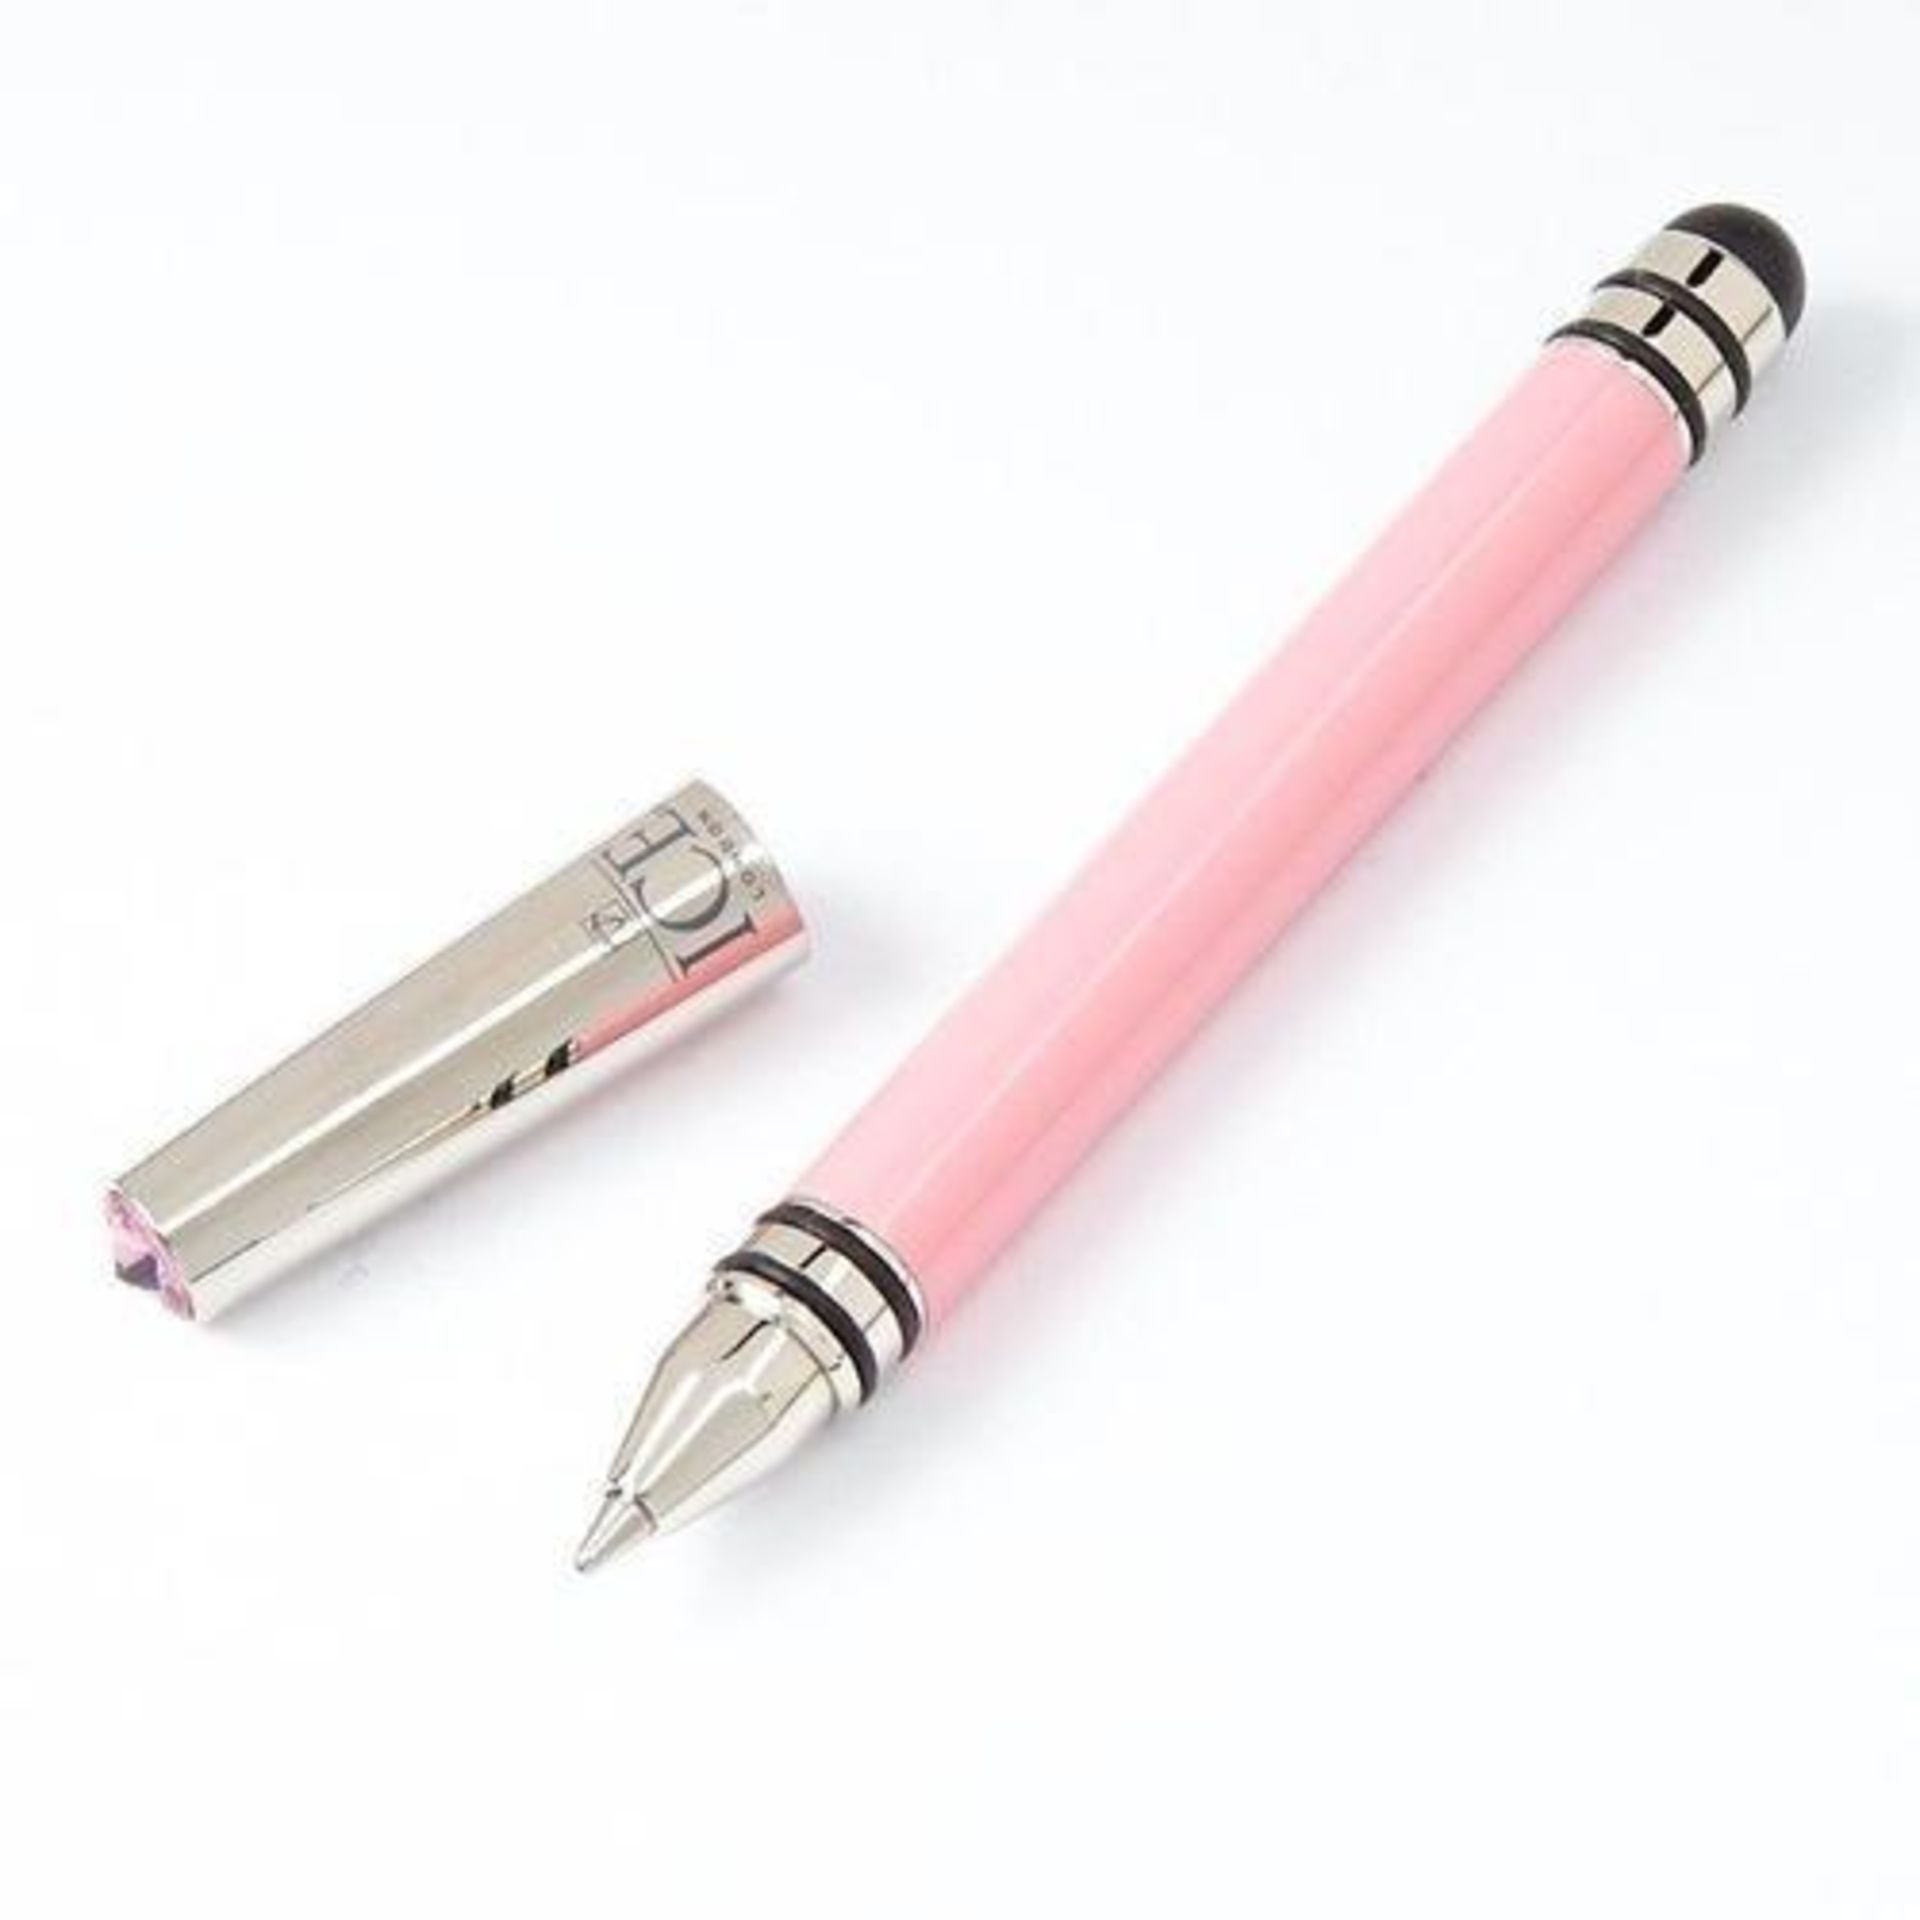 10 x ICE LONDON App Pen Duo - Touch Stylus And Ink Pen Combined - Colour: LIGHT PINK - MADE WITH - Image 6 of 6